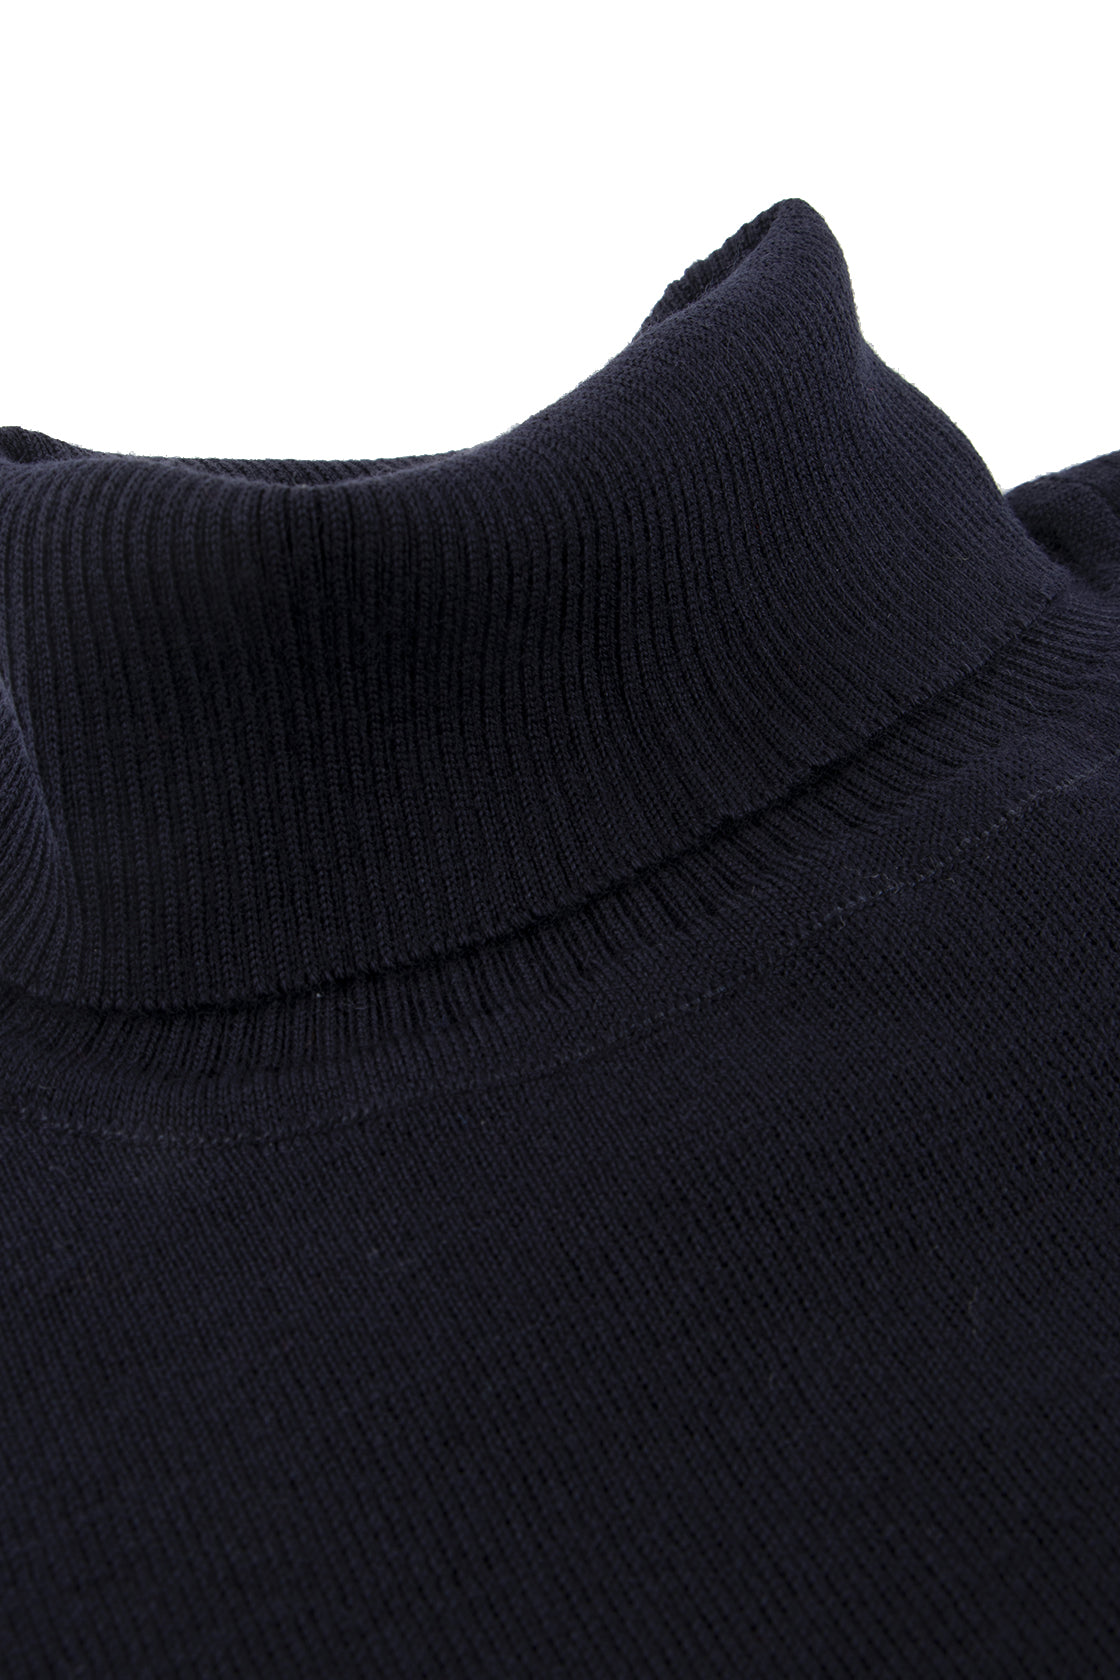 Routleys Franklin Roll Neck Sweater Navy